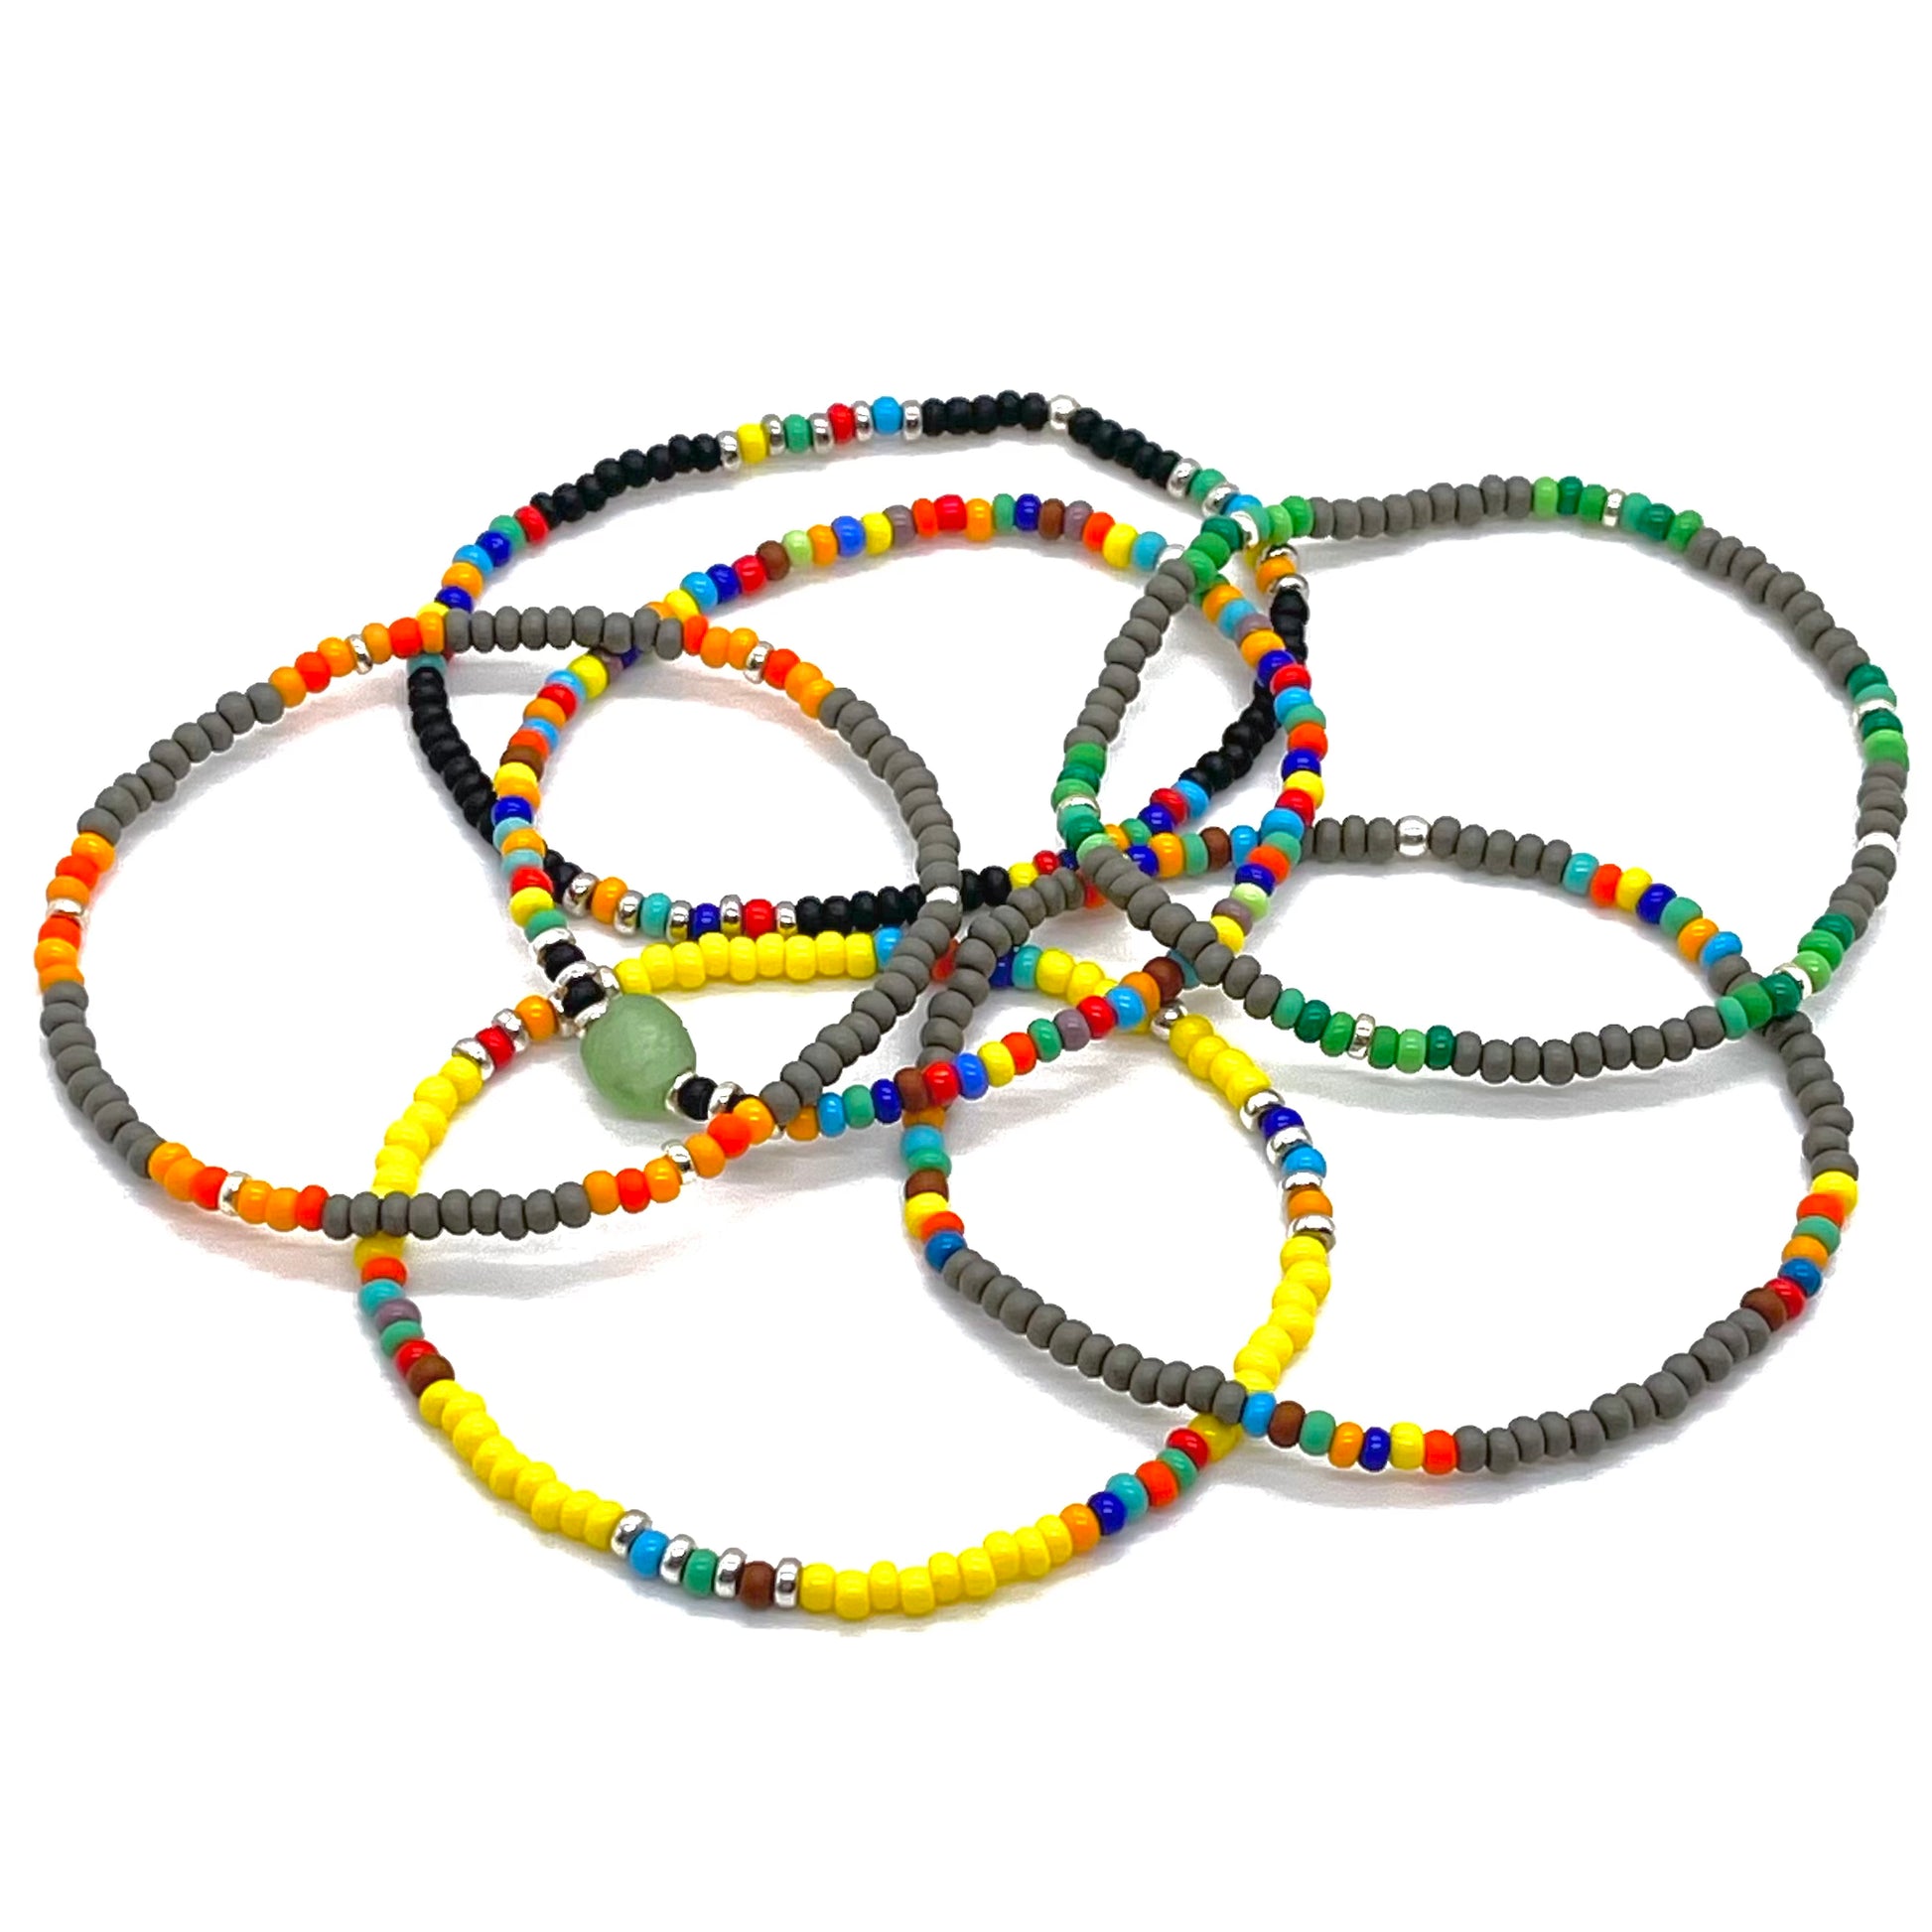 Men's beaded bracelets with multi-color beads. Thin, stacking, stretch bracelets.